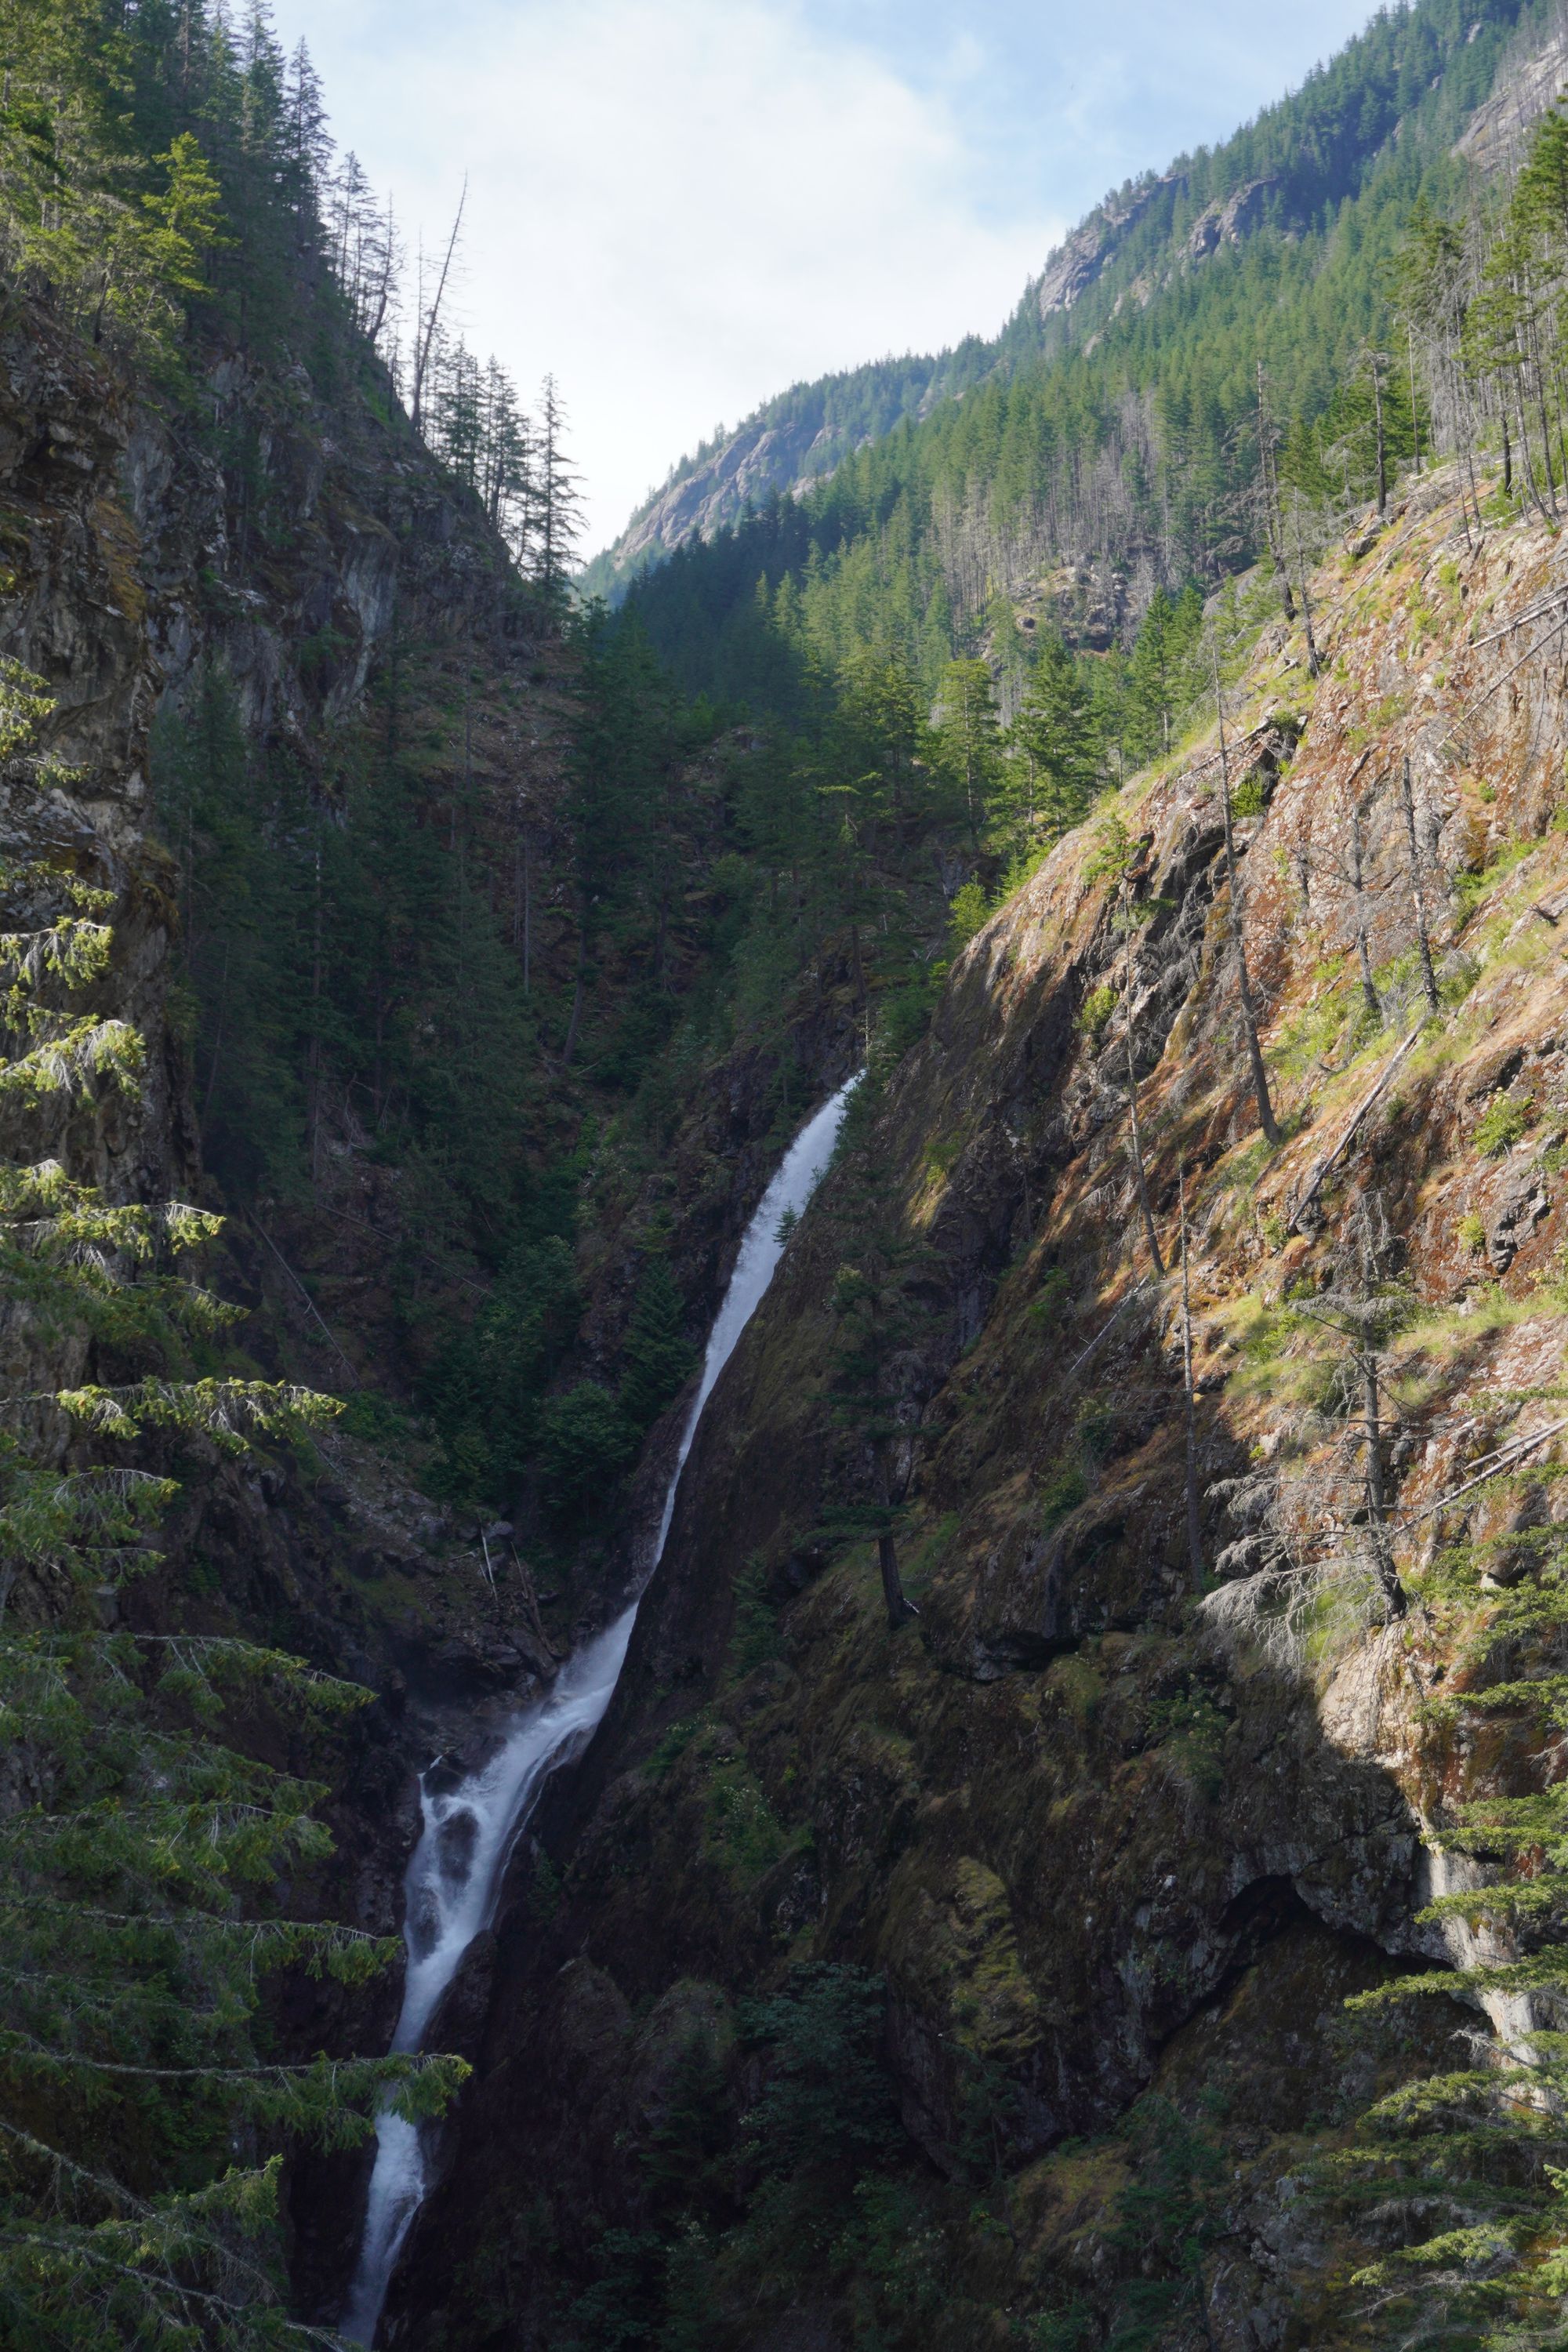 One day in North Cascades National Park